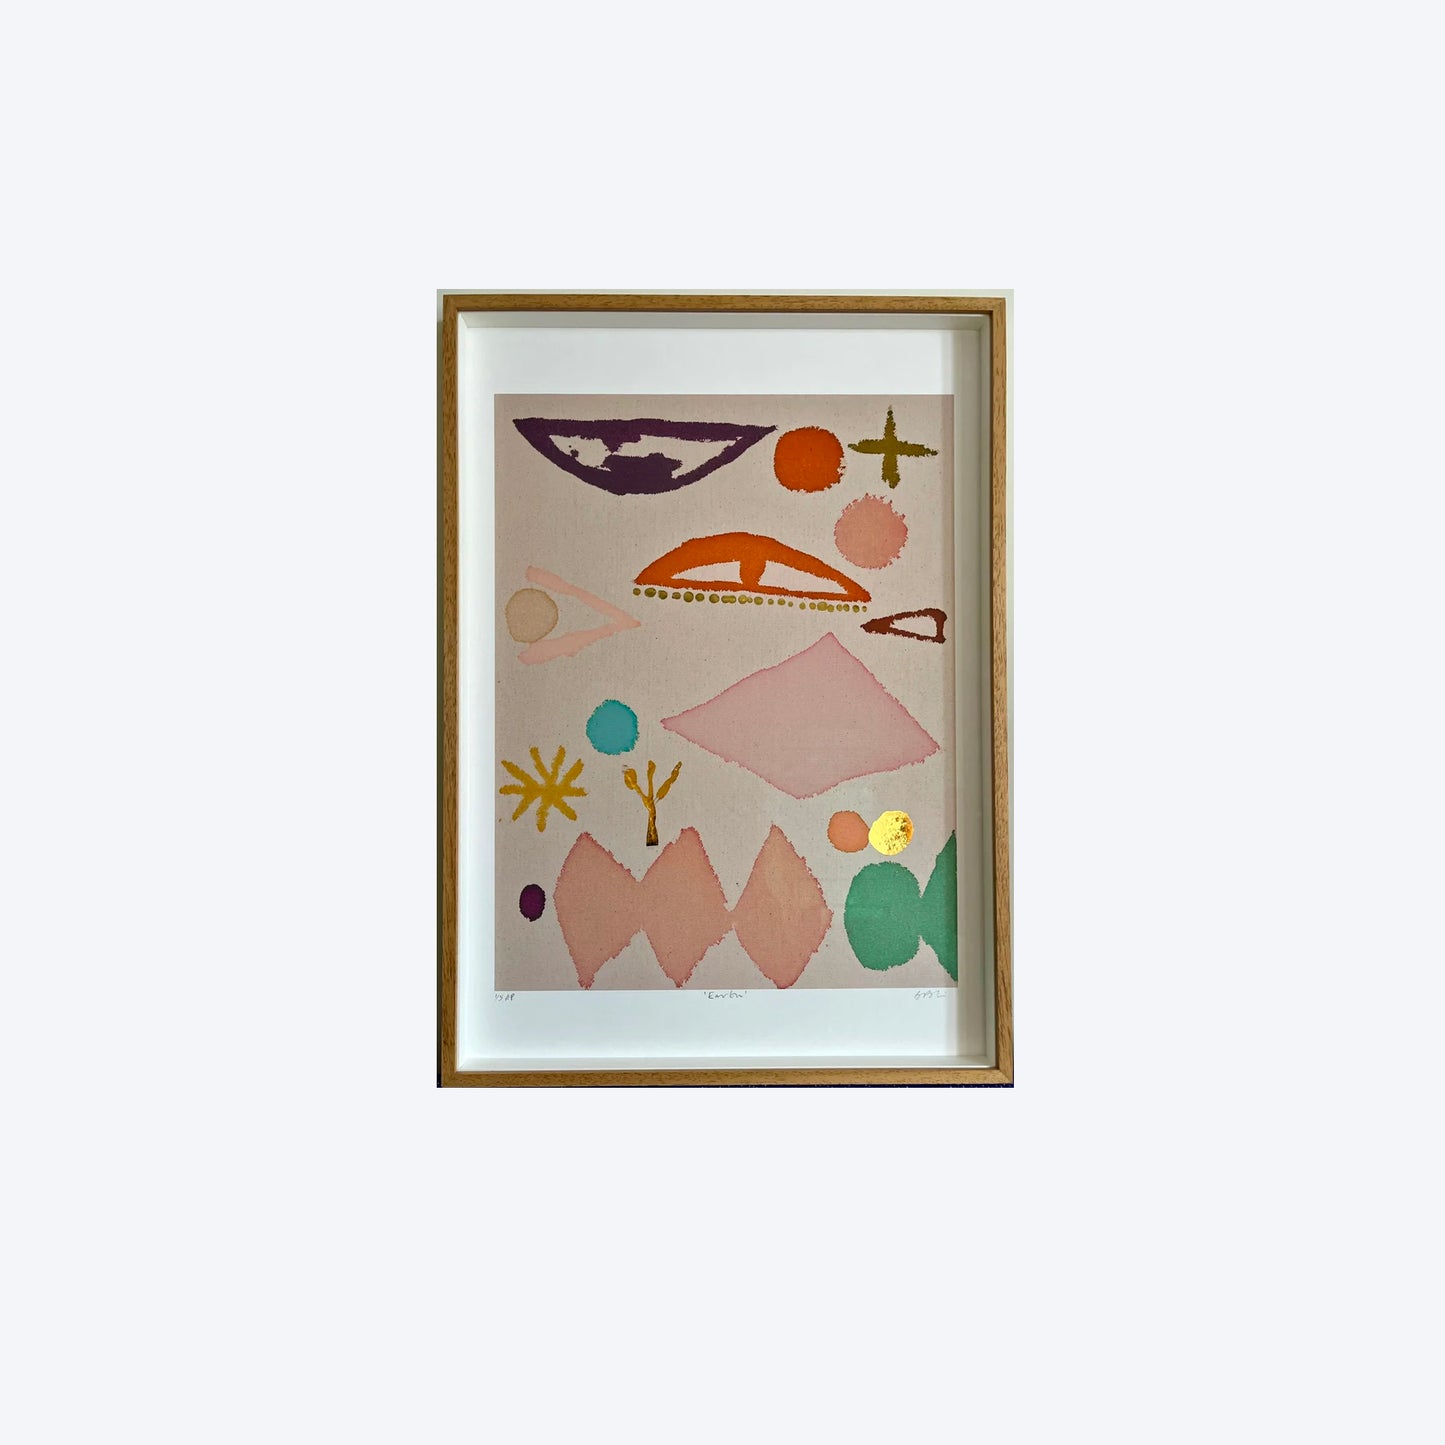 Earth Limited Edition Giclee Print